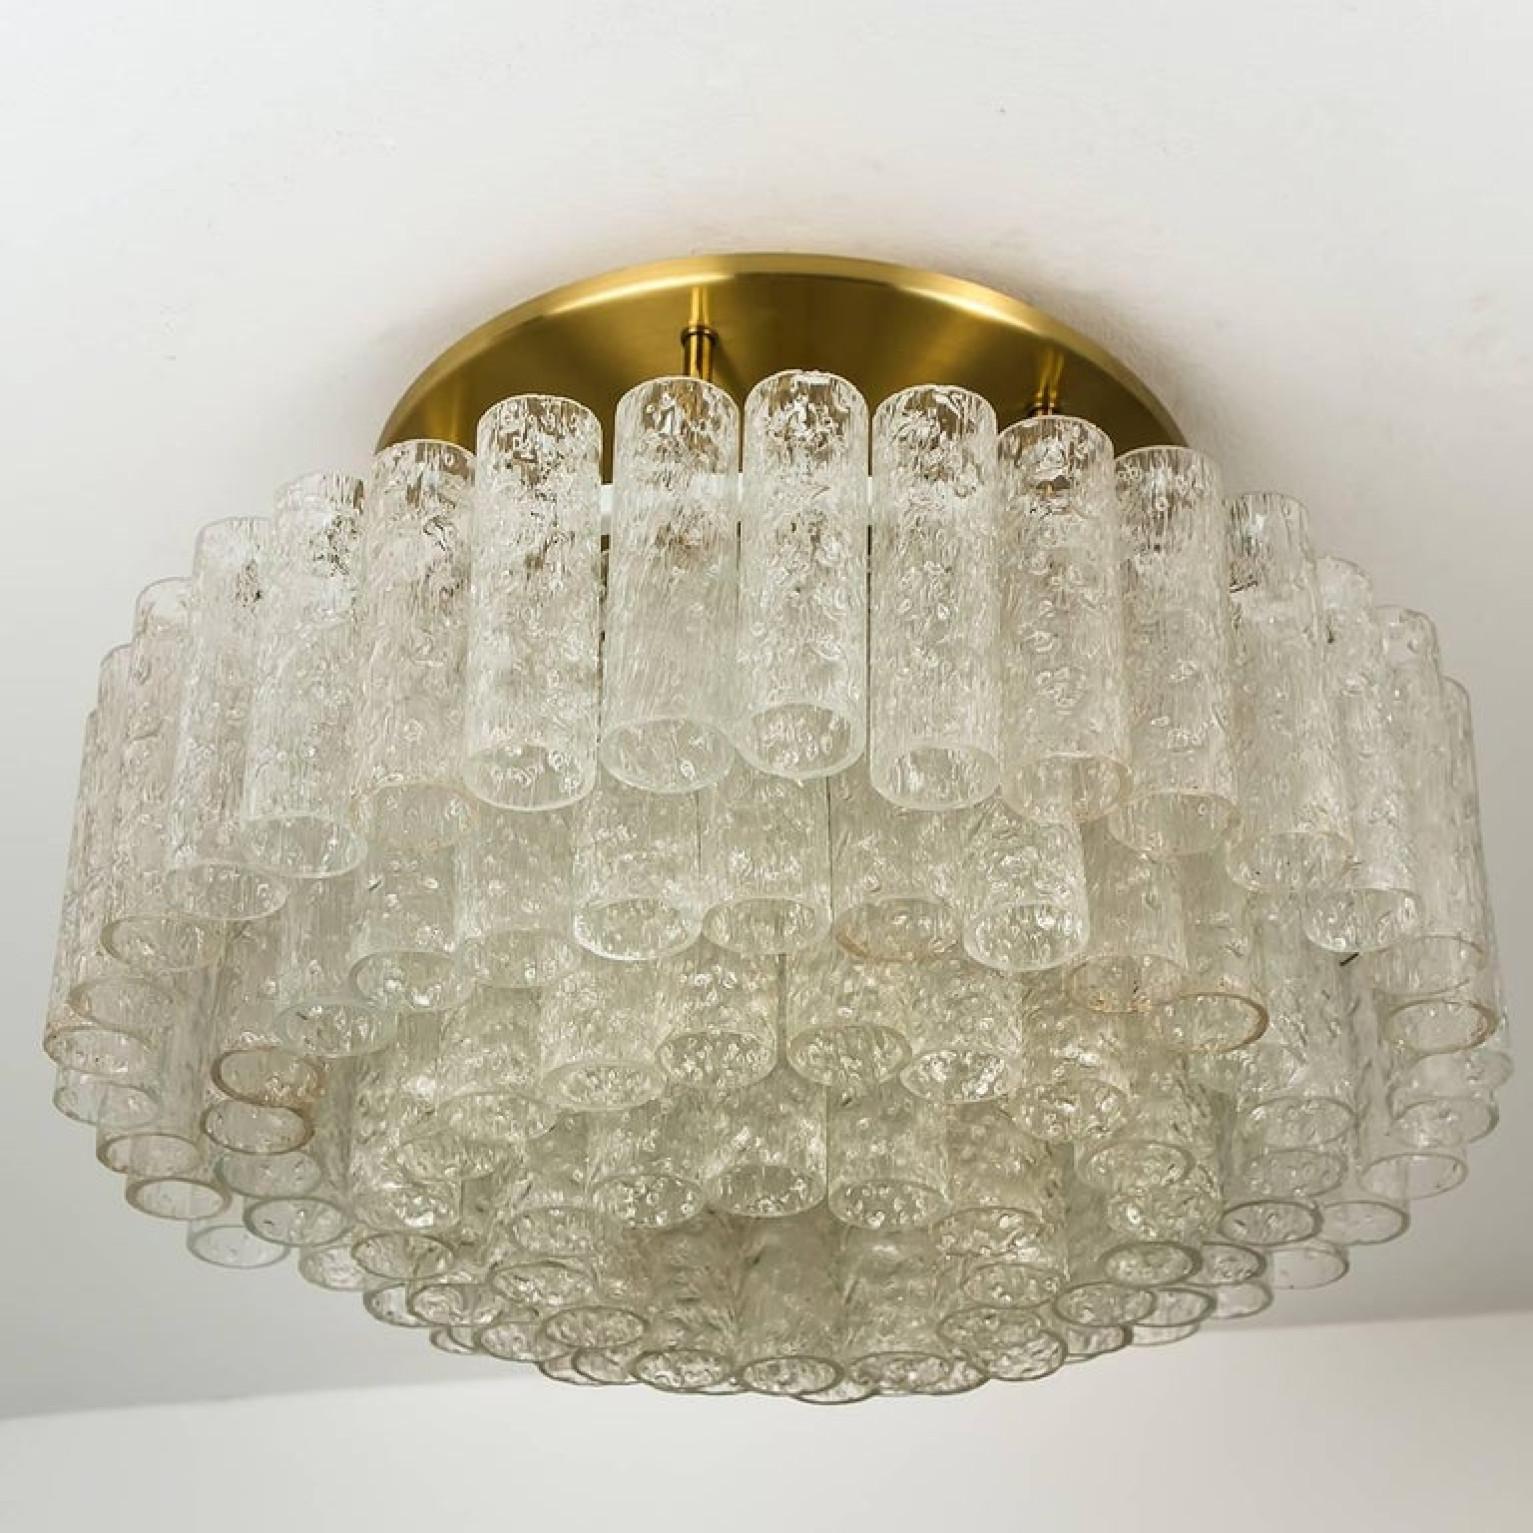 One of the Six Large Blown Glass Brass Flush Mount Light Fixtures by Doria 1960s For Sale 2